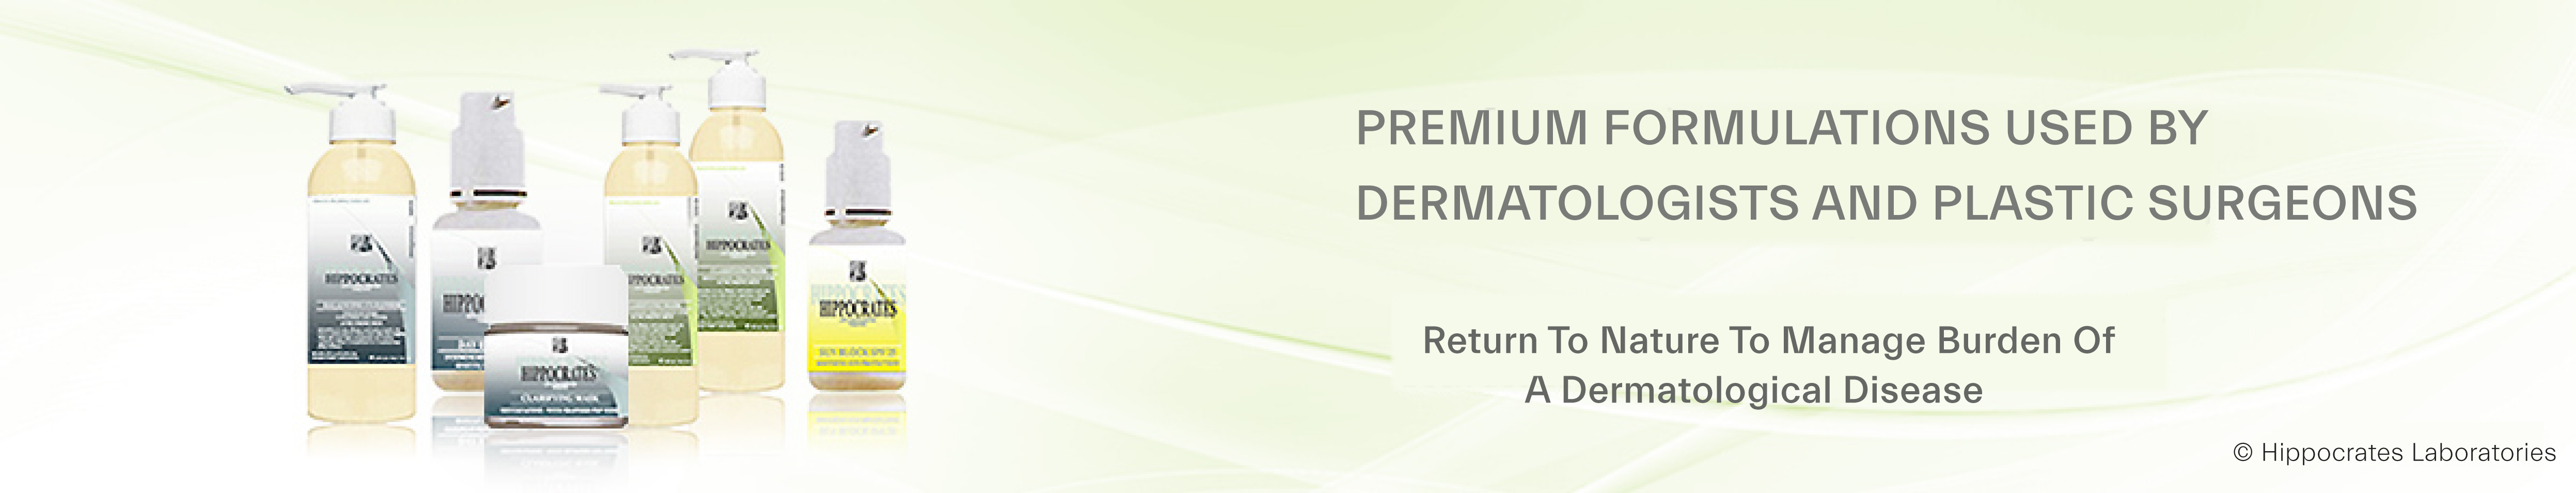 dermatology skin care products